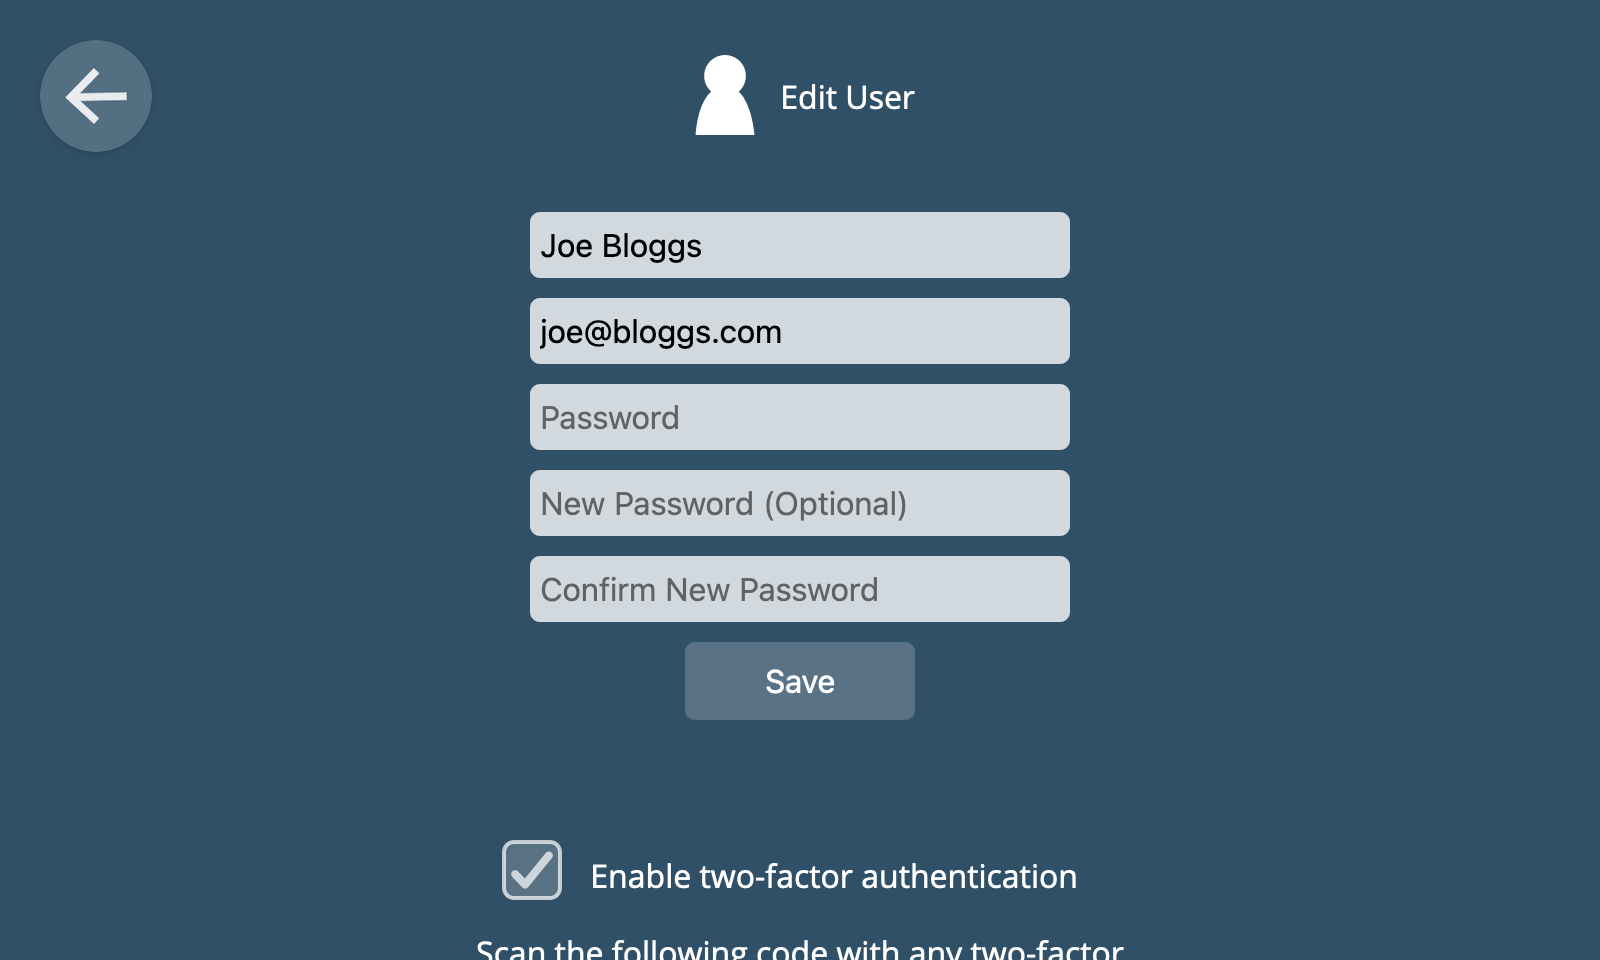 Screenshot showing the edit user screen with the two-factor authentication checkbox ticked